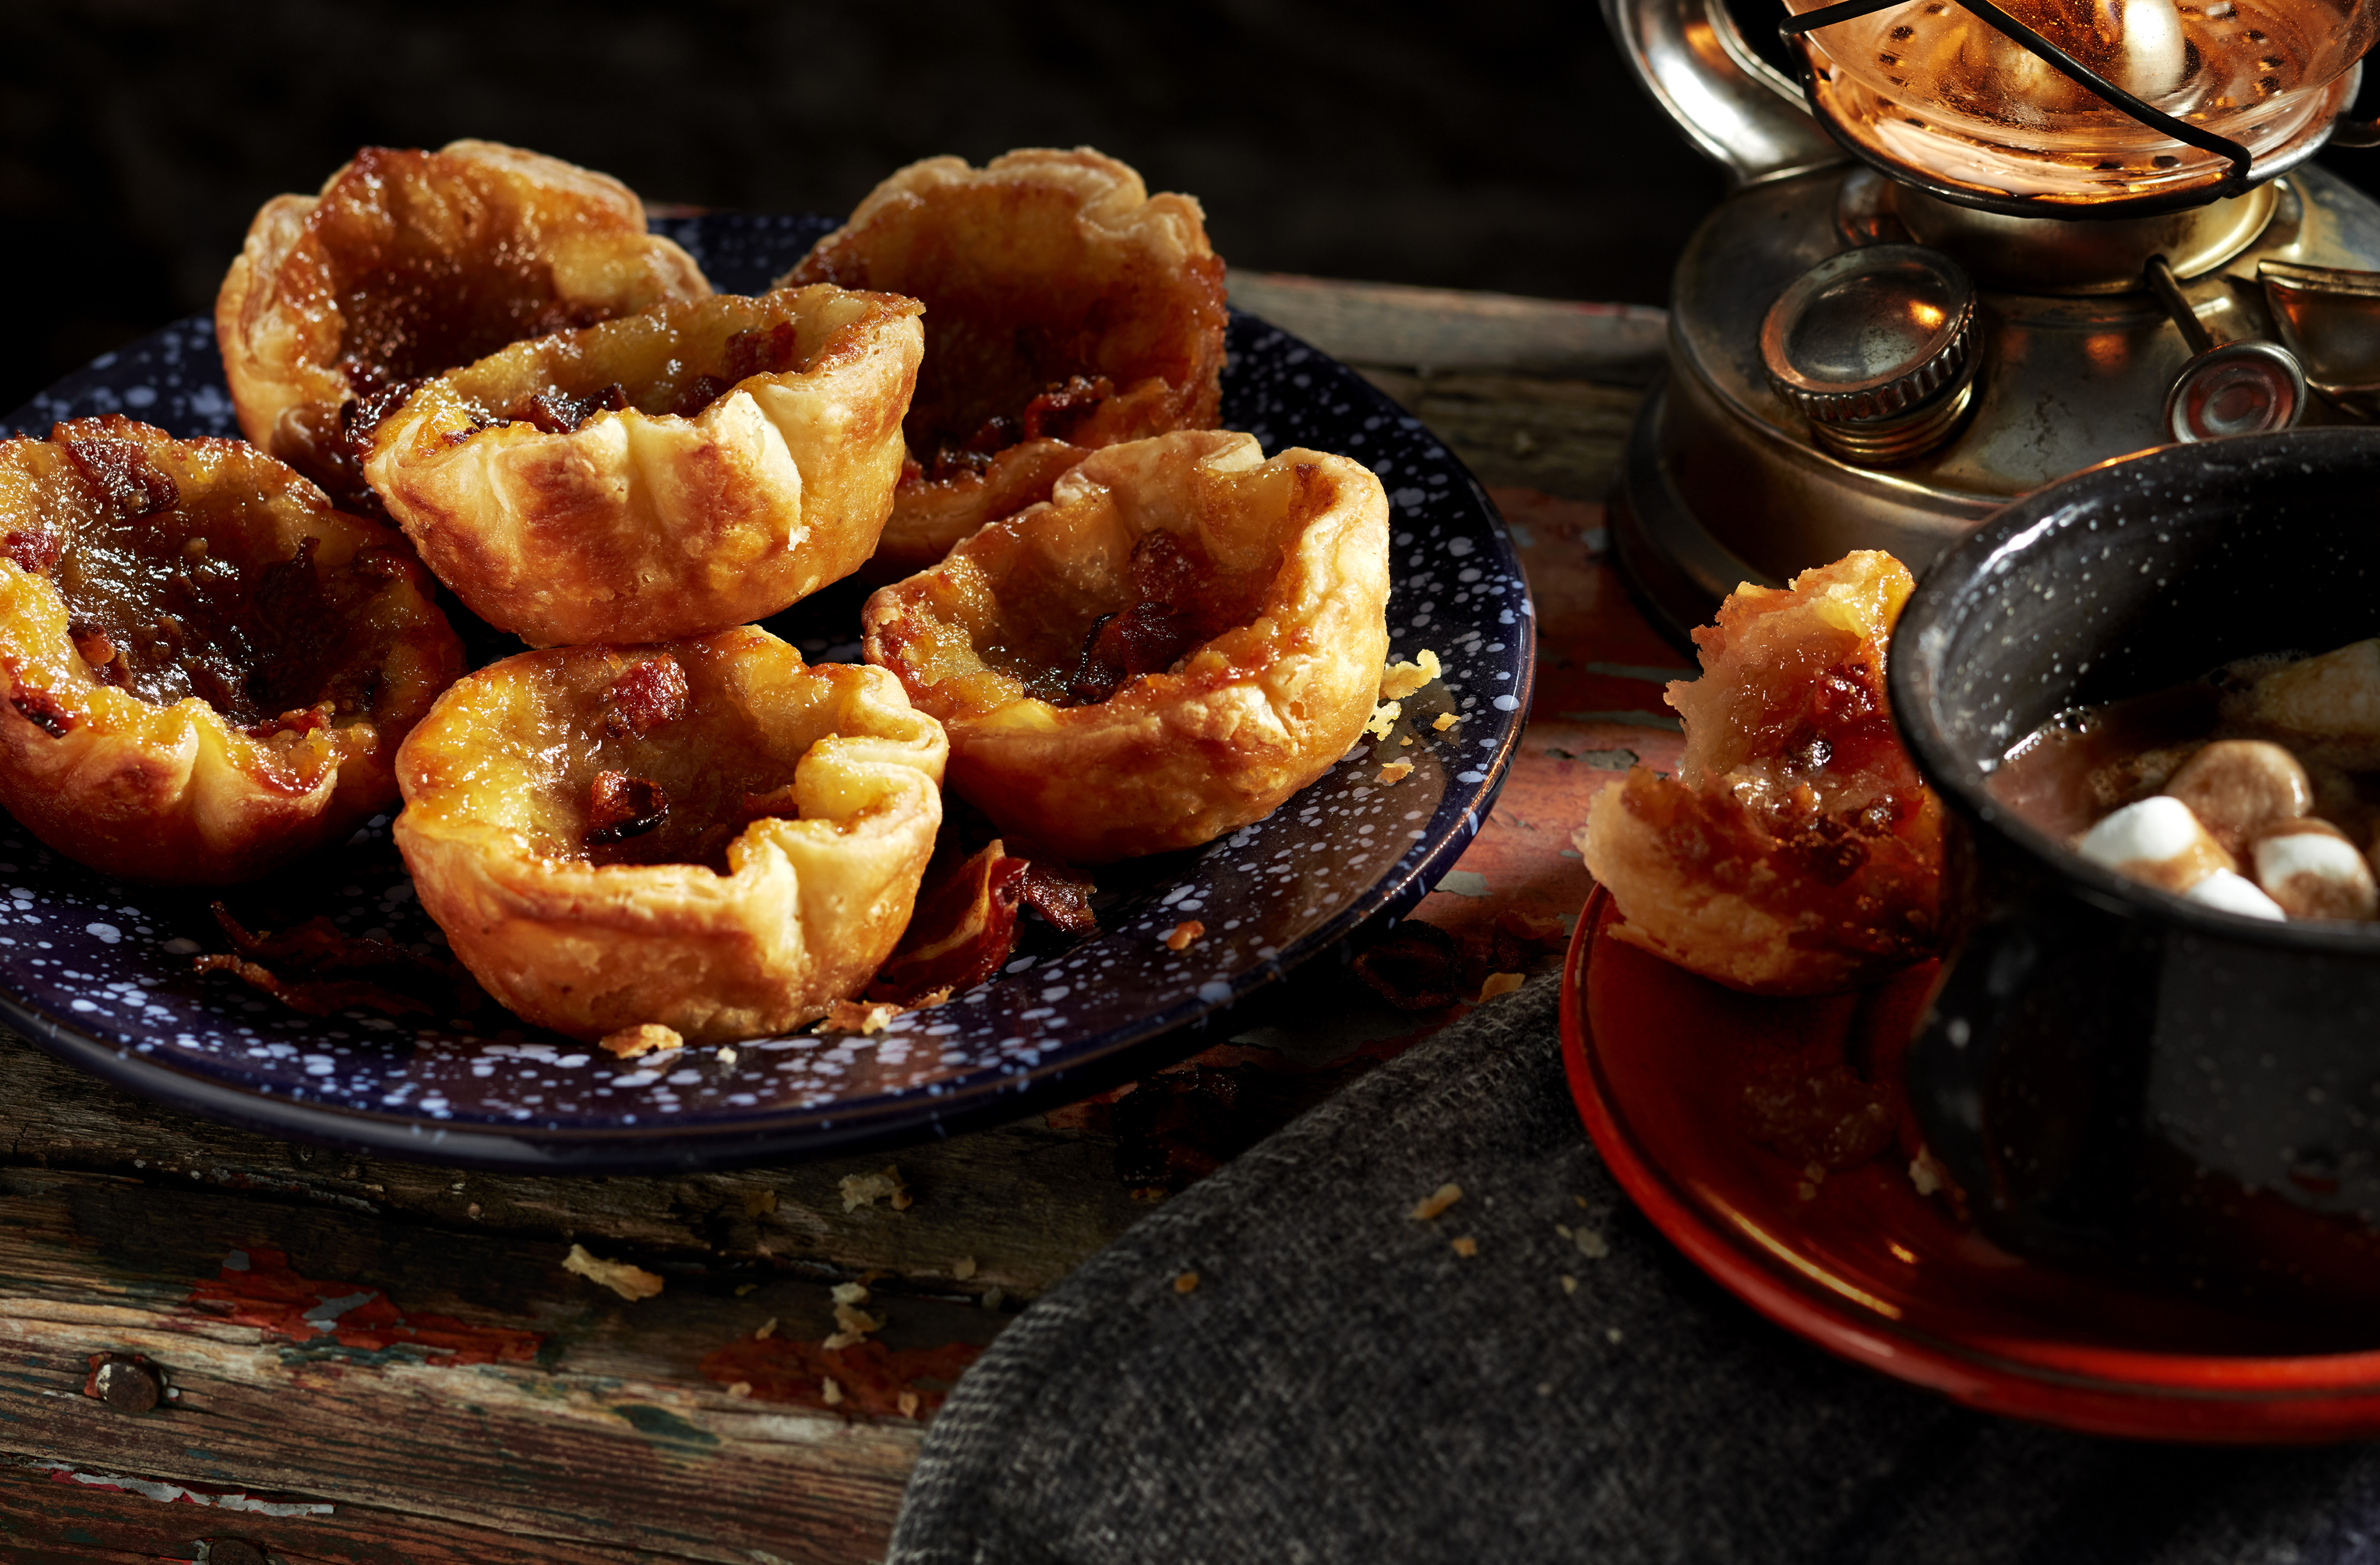 Six butter tarts stacked on a plate beside a lantern and hot chocolate